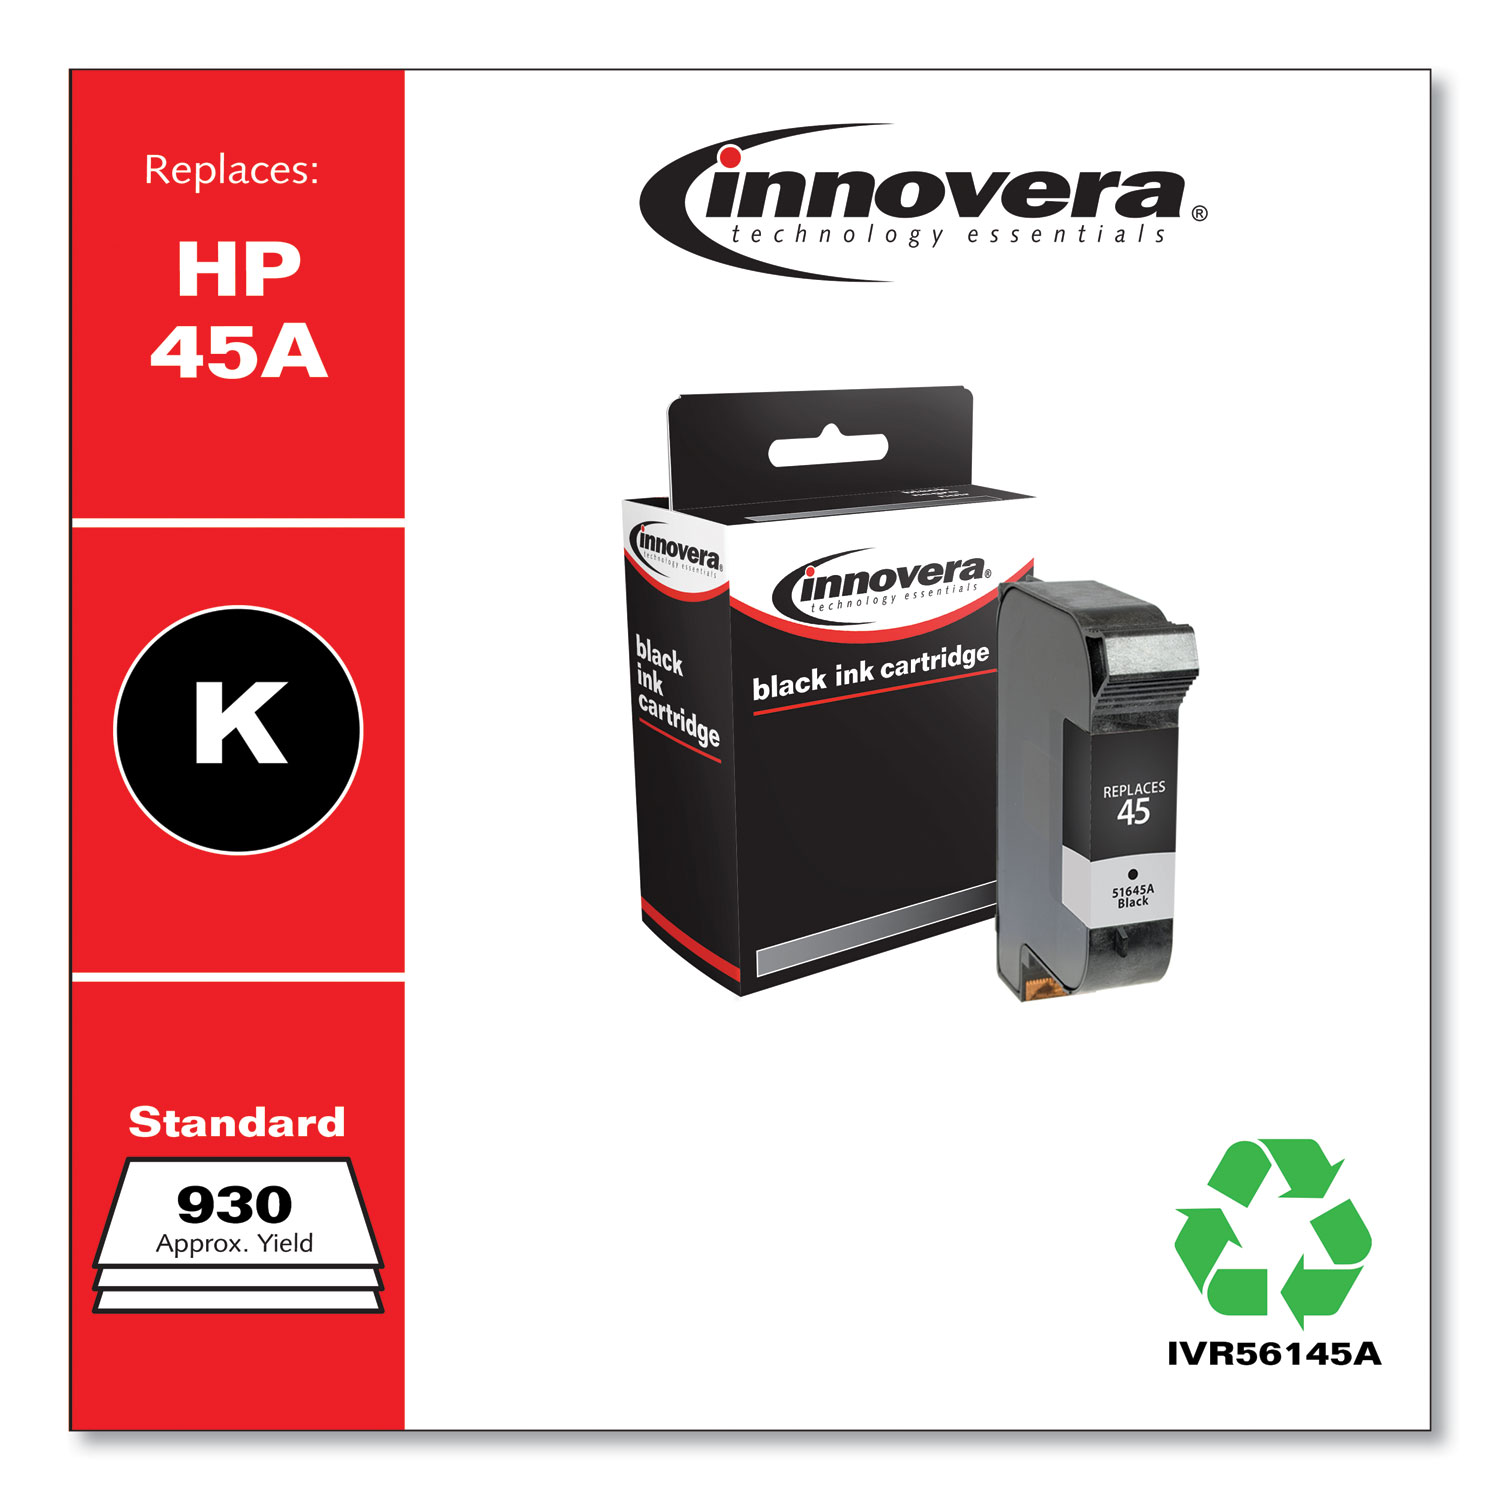  Innovera IVR56145A Compatible Black Ink, Replacement for HP 45A (51645A), 930 Page-Yield (IVR56145A) 